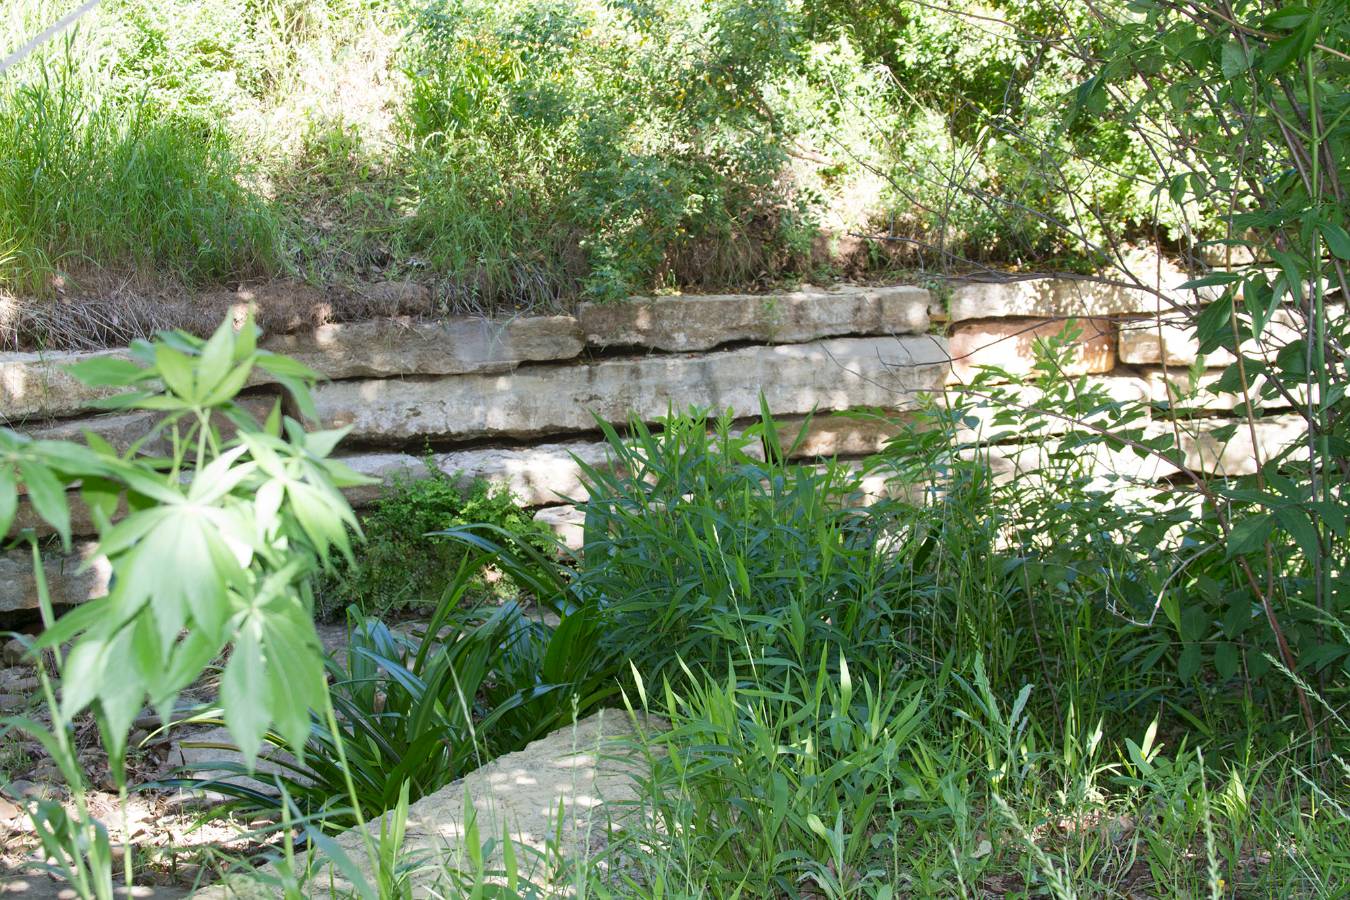 A view of native prairie plants and a rock wall on the grounds of the George W Bush Library and Museum